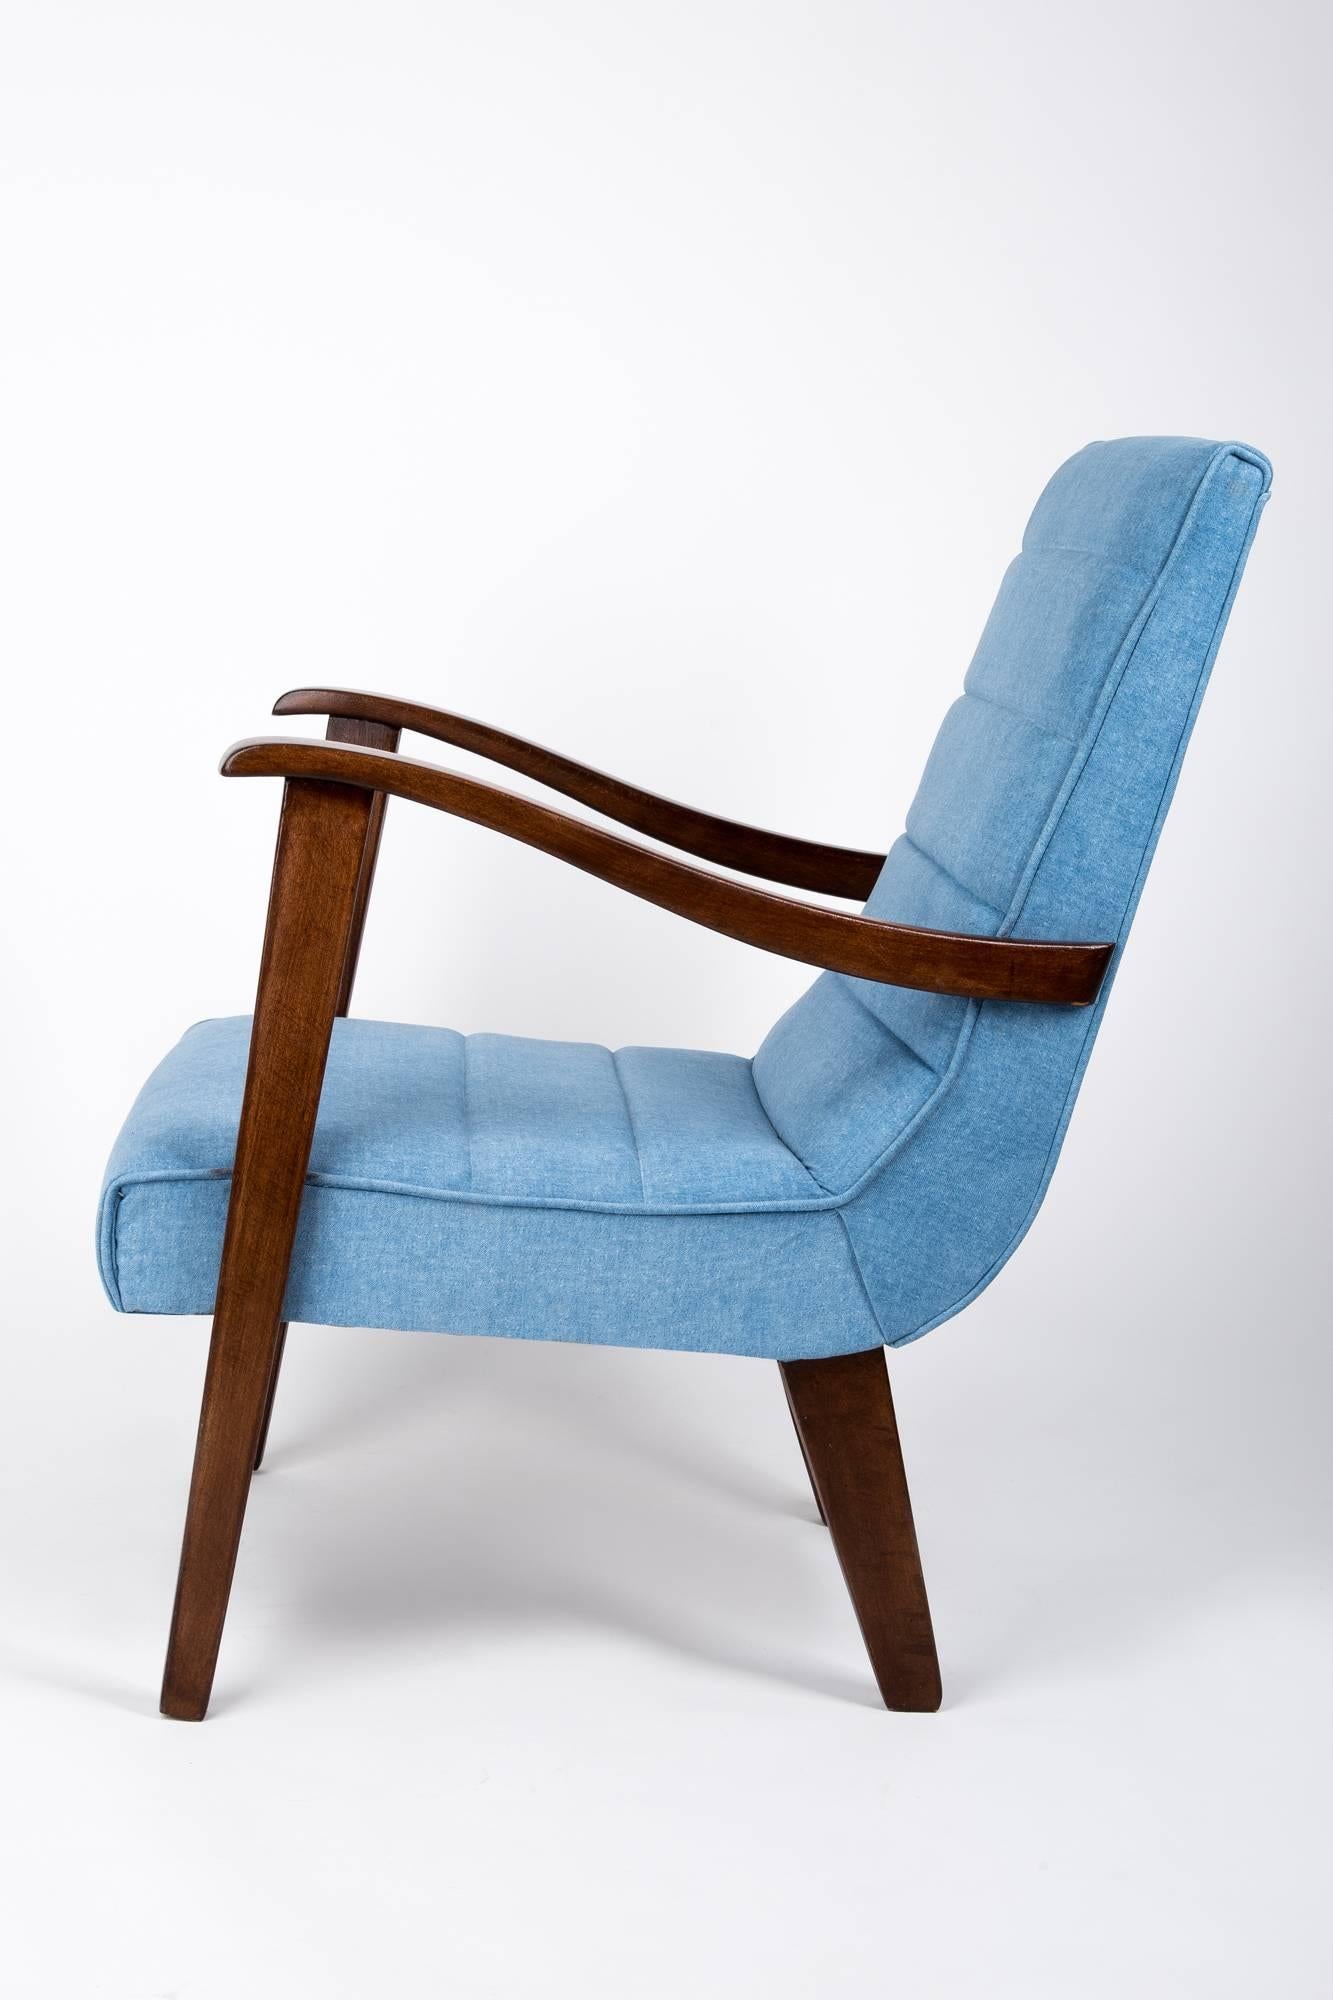 Hand-Crafted Mid-Century Modern Blue Armchair by Prudnik Furniture Factory, 1960s, Poland For Sale